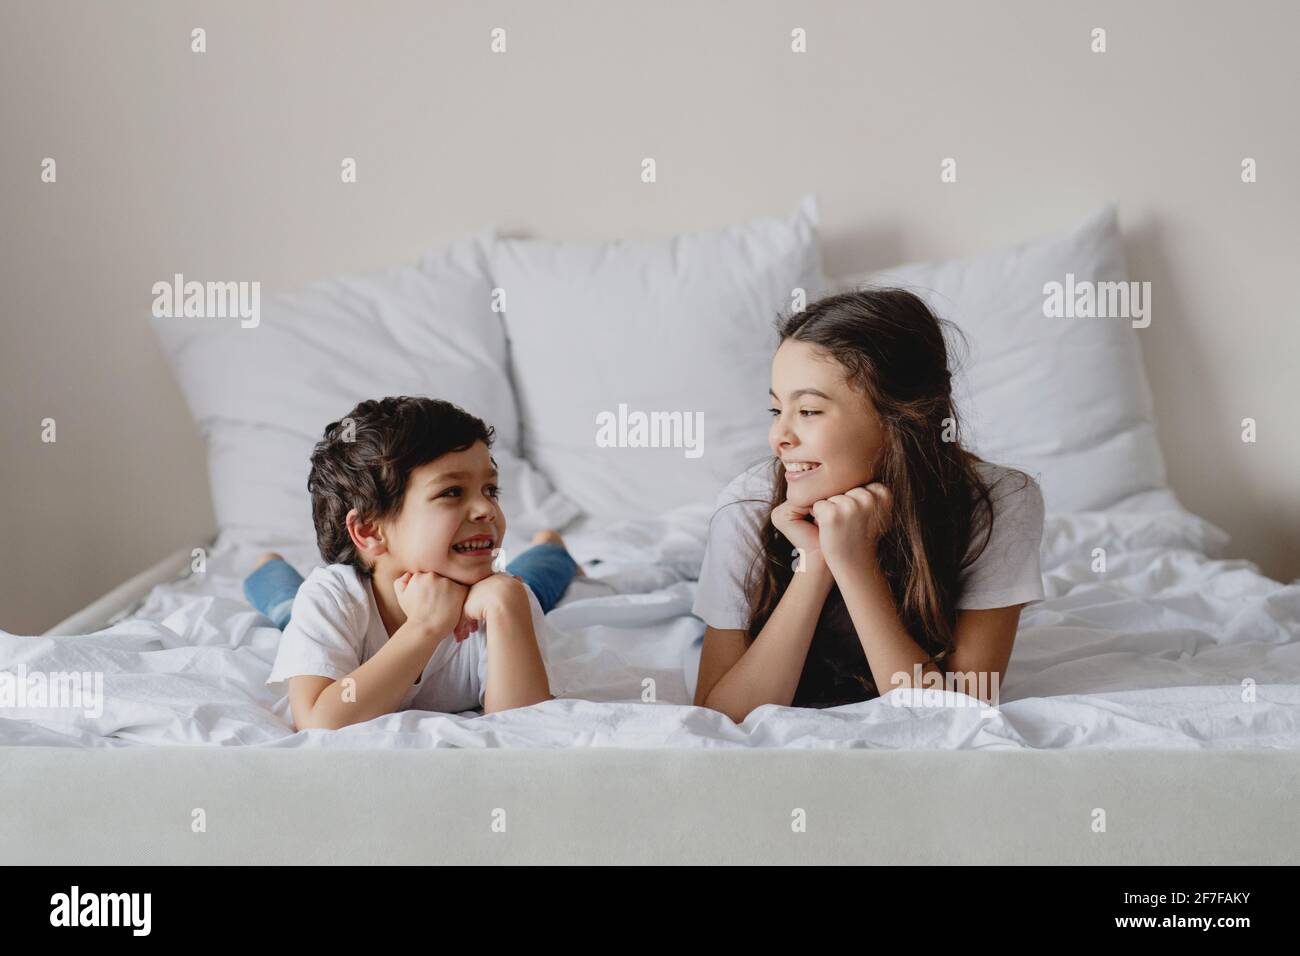 Brother and sister chilling on the bed smiling and looking at each other. Stock Photo